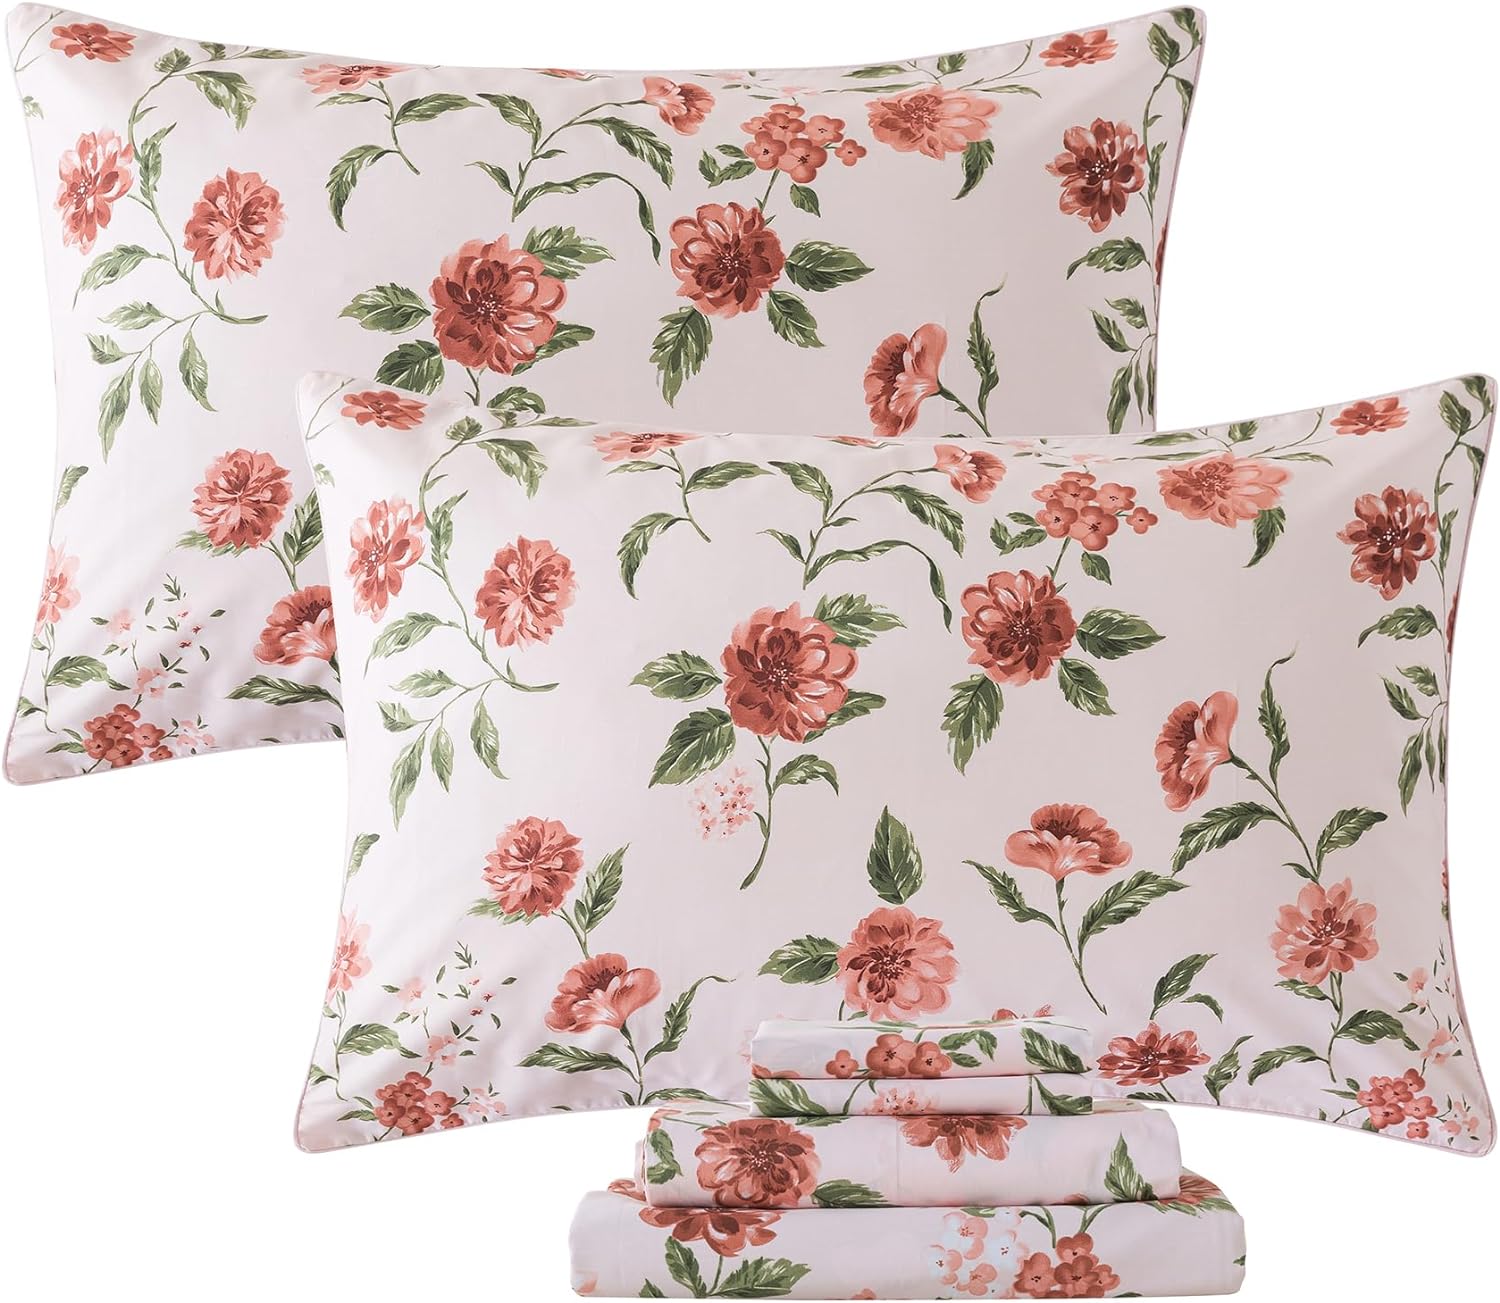 FADFAY Sheets Set Queen Rose Floral Bedding Shabby Pink Hydrangea Flower Bed Sheet Set Vintage Farmhouse Bedding 100% Cotton Soft Breathable Bedding with Deep Pocket Fitted Sheet 4Pcs, Queen Size